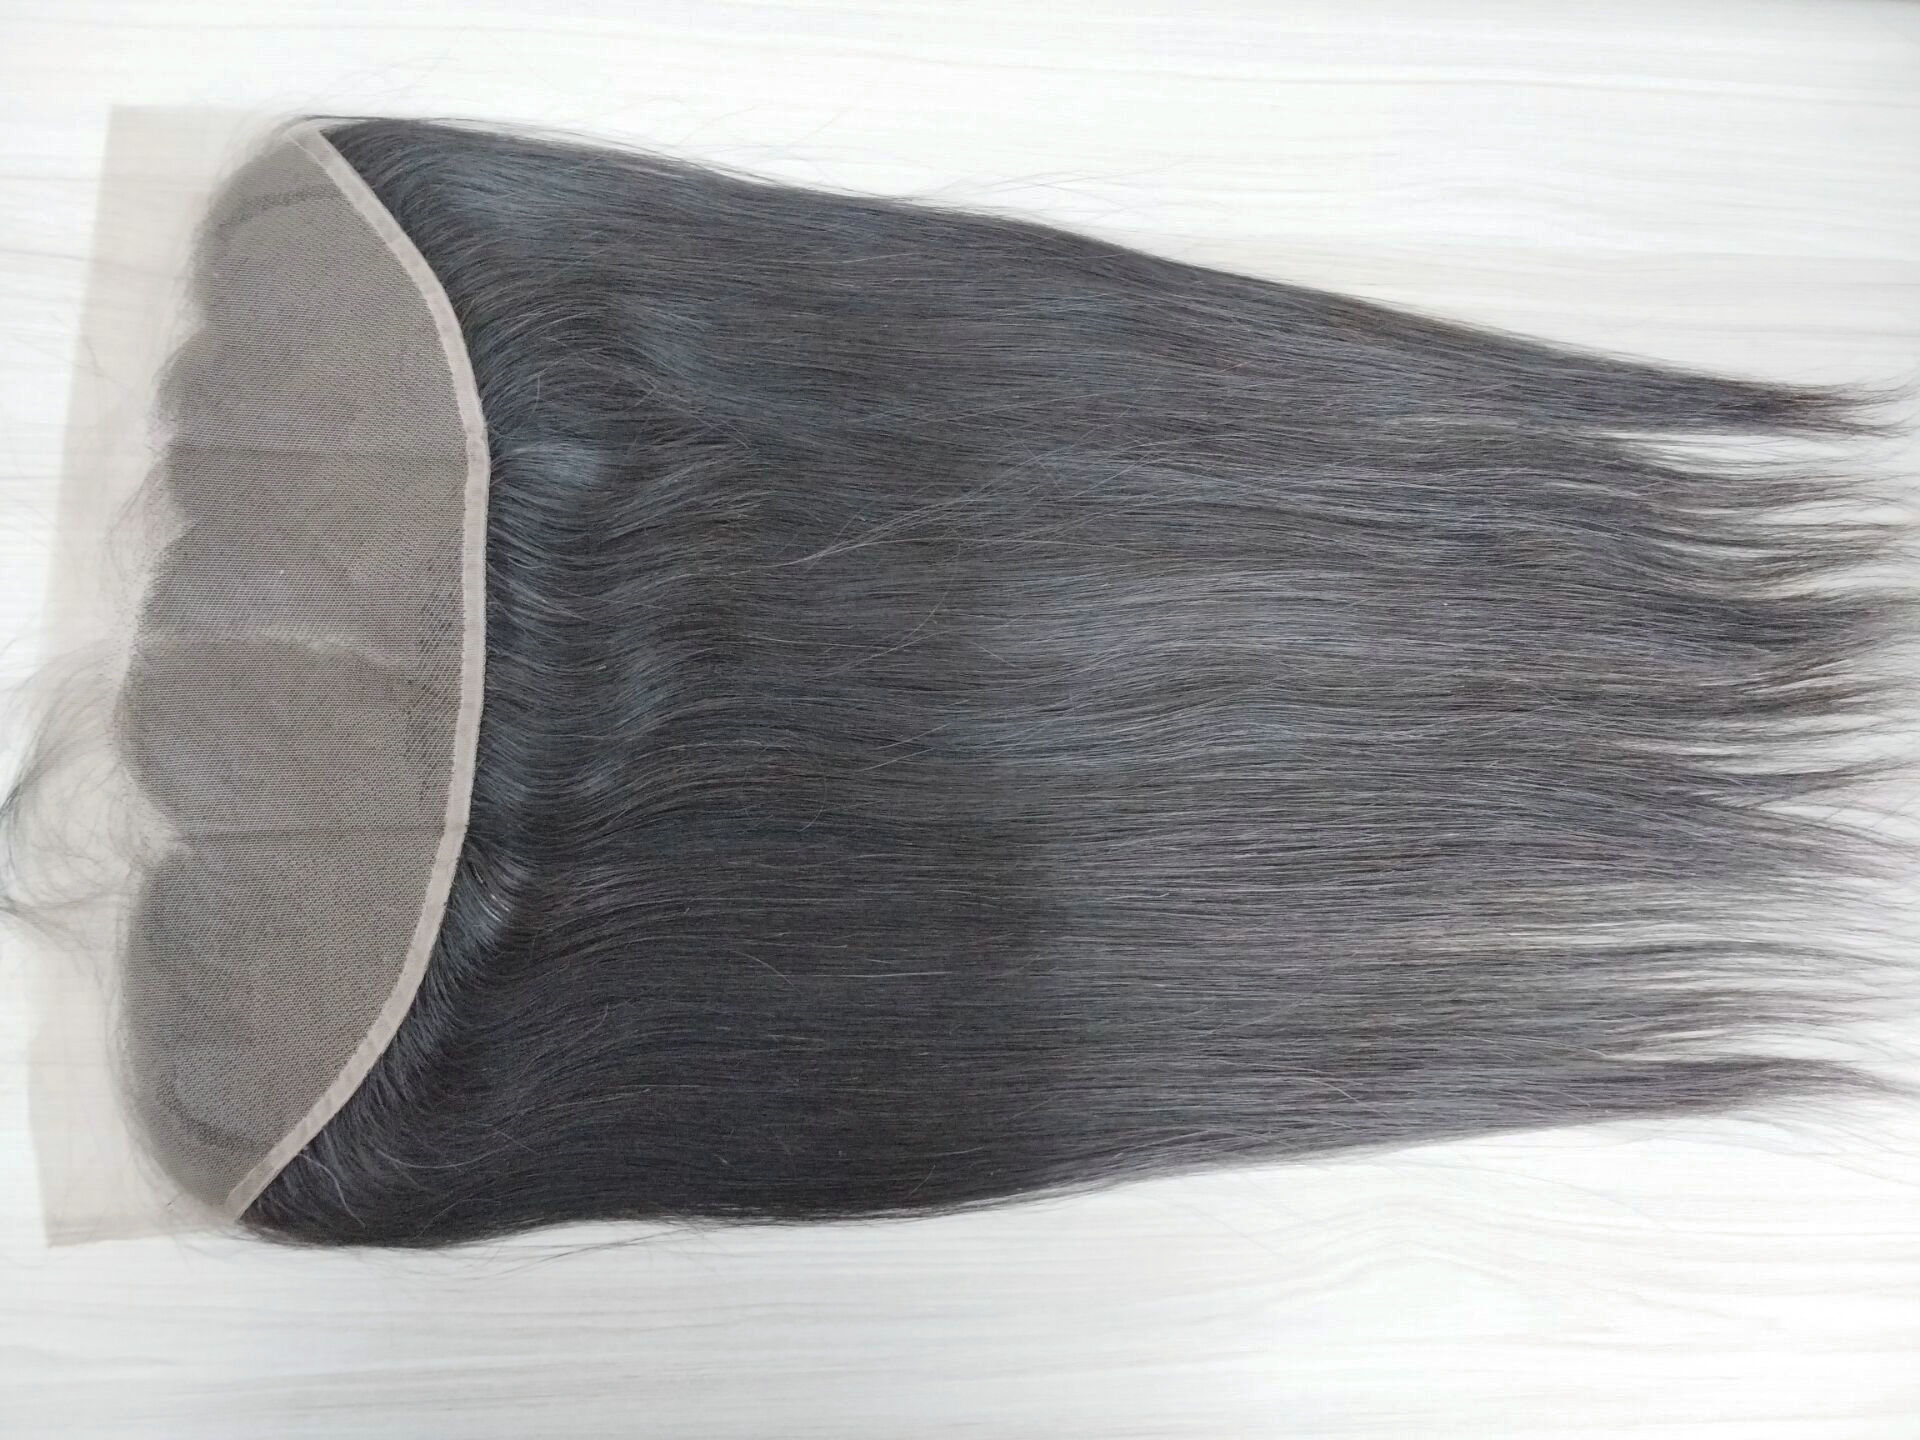  13*4 inch lace frontals from ear to ear,pre-plucked hair line YL124